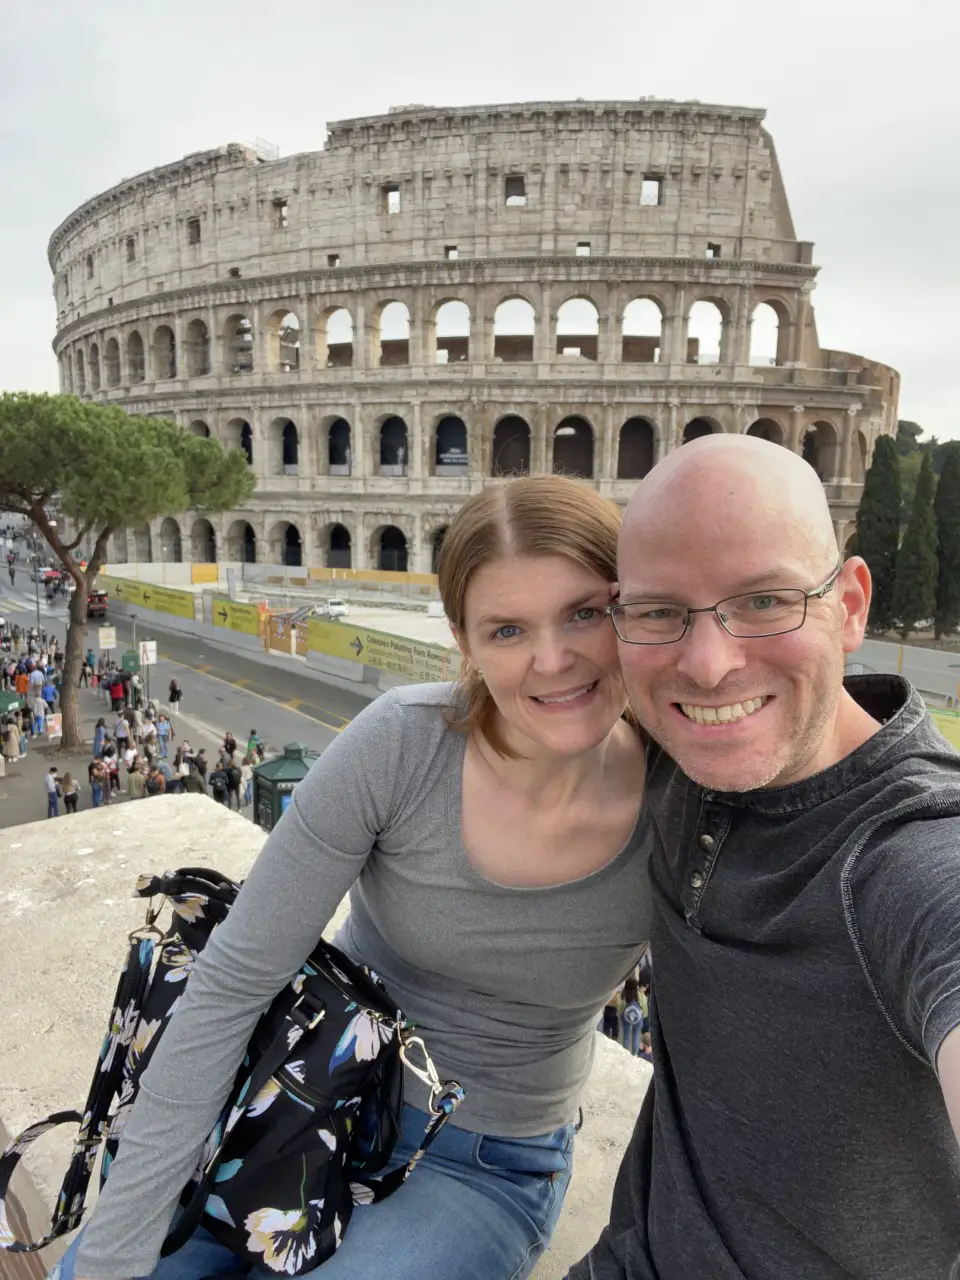 Minnie and her husband Jesse in front of the Rome Colosseum